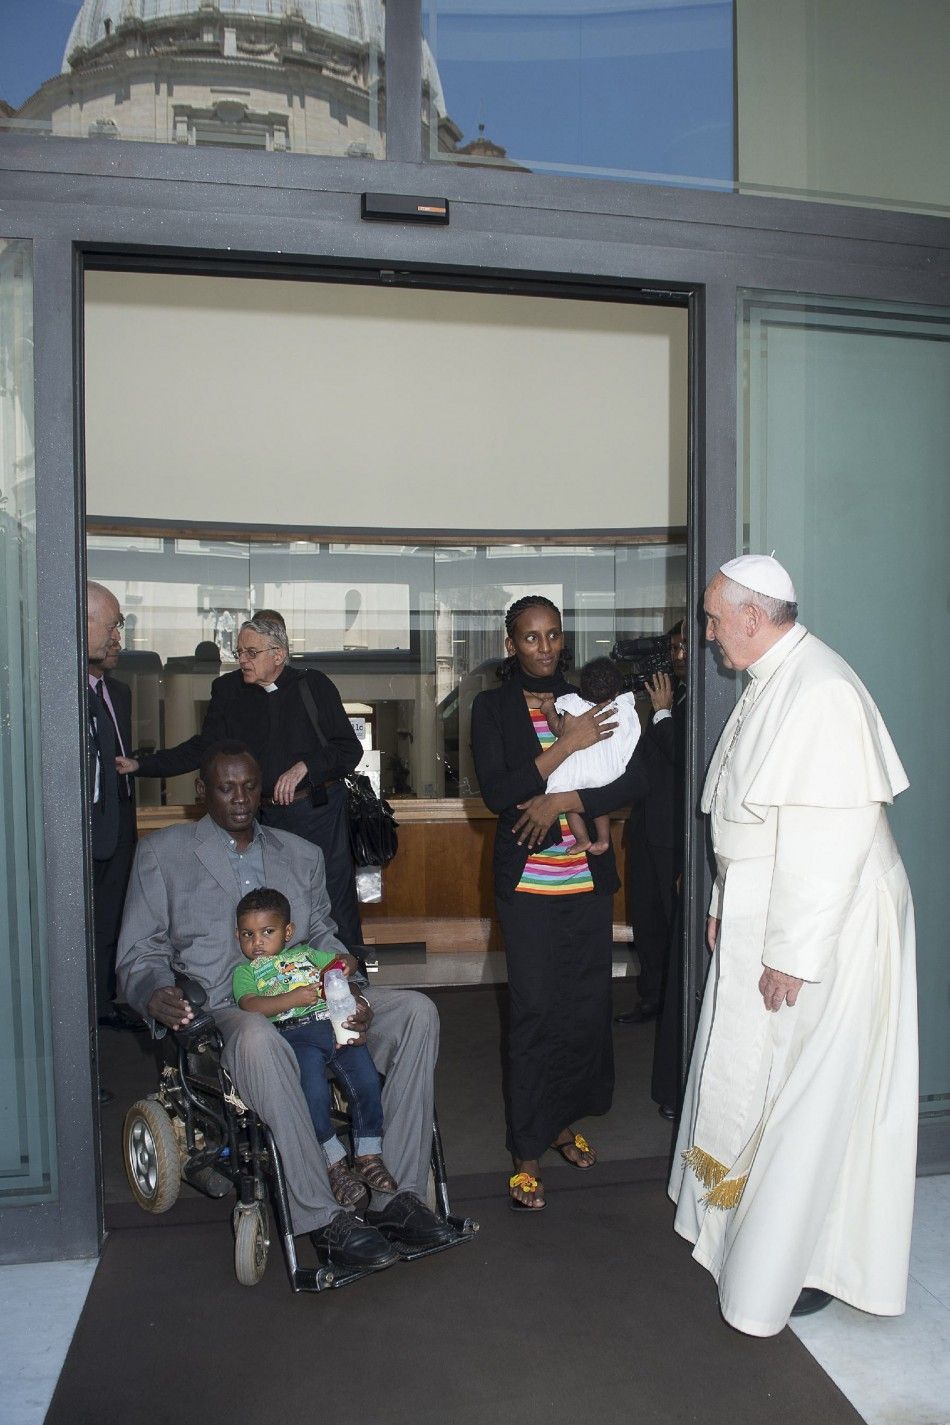 Pope Francis R greets Mariam Yahya Ibrahim 2nd R of Sudan, her husband and two children during a private meeting at the Vatican July 24, 2014. The Sudanese woman who was sentenced to death for converting from Islam to Christianity, then detained after